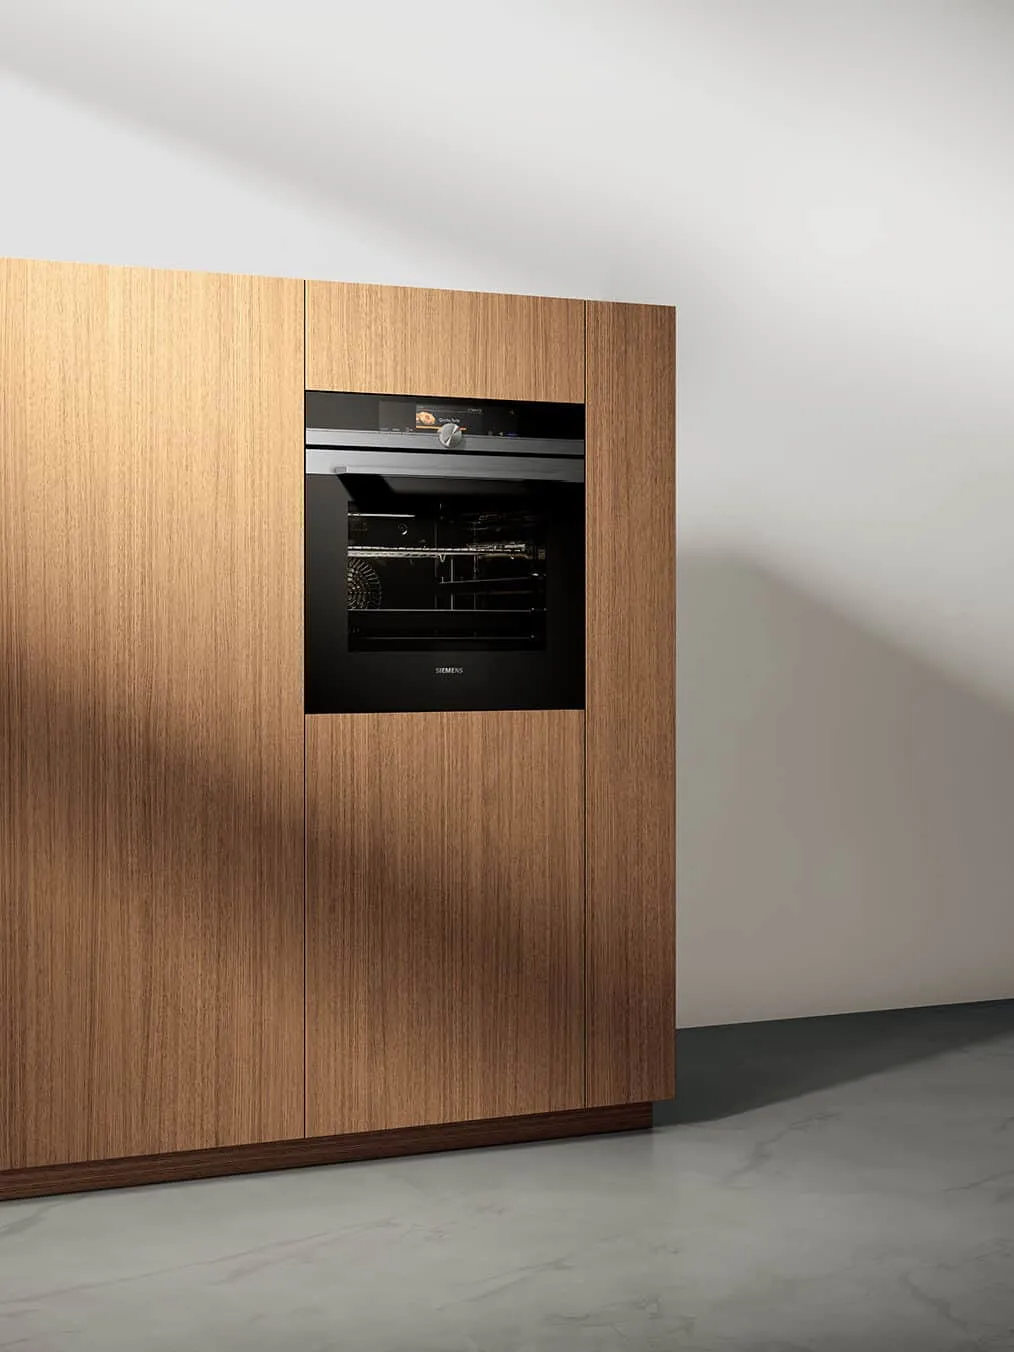 combination steam oven&microwave flushed into brown cabinetry